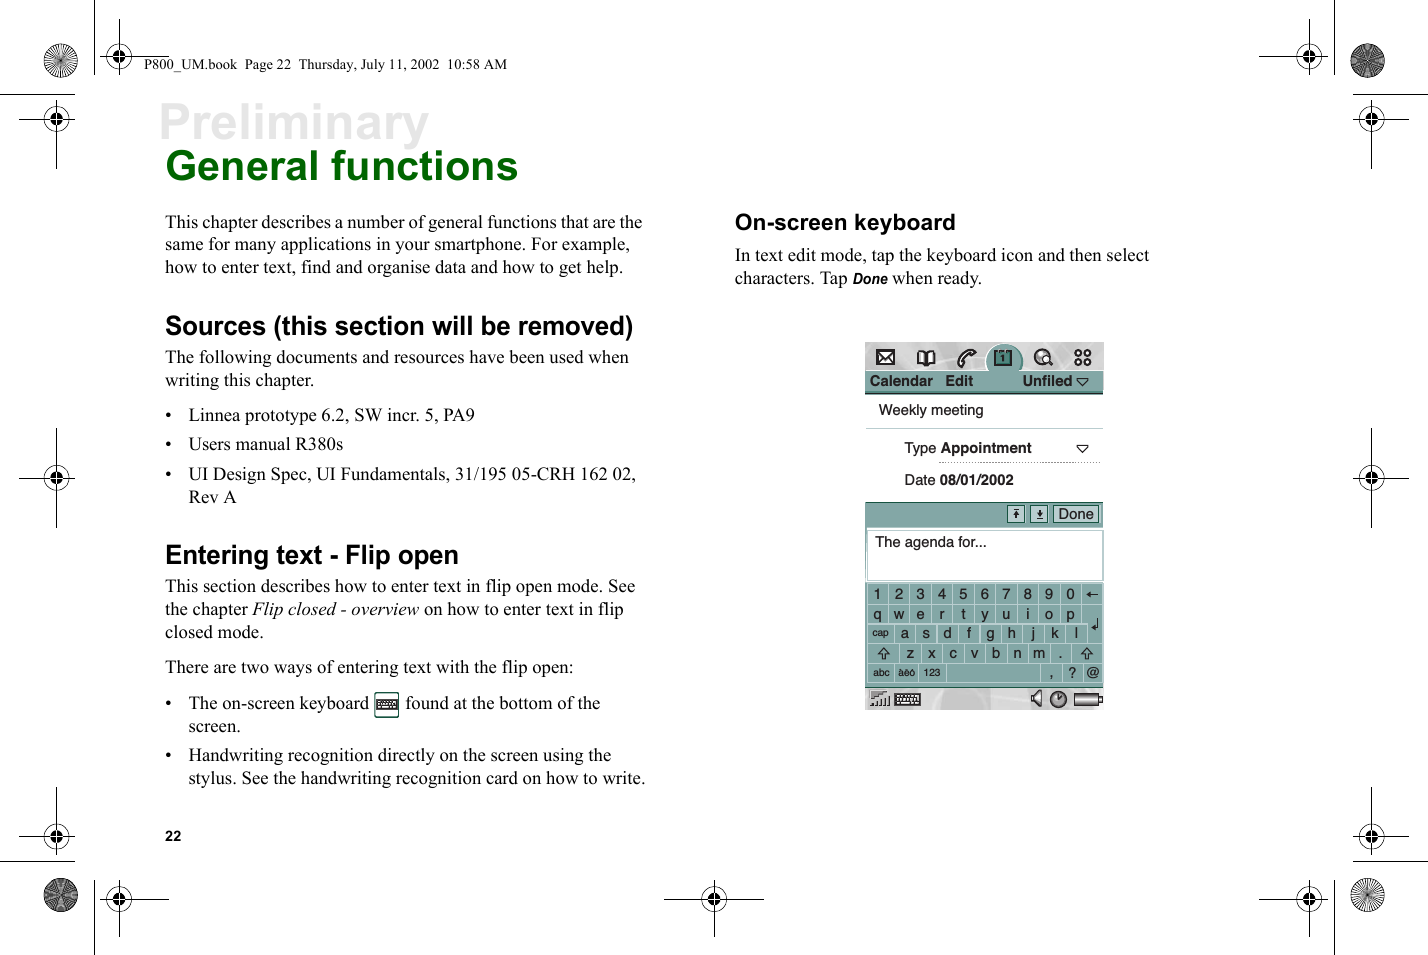 22PreliminaryGeneral functionsThis chapter describes a number of general functions that are the same for many applications in your smartphone. For example, how to enter text, find and organise data and how to get help.Sources (this section will be removed)The following documents and resources have been used when writing this chapter.• Linnea prototype 6.2, SW incr. 5, PA9• Users manual R380s• UI Design Spec, UI Fundamentals, 31/195 05-CRH 162 02, Rev AEntering text - Flip openThis section describes how to enter text in flip open mode. See the chapter Flip closed - overview on how to enter text in flip closed mode.There are two ways of entering text with the flip open:• The on-screen keyboard   found at the bottom of the screen.• Handwriting recognition directly on the screen using the stylus. See the handwriting recognition card on how to write.On-screen keyboardIn text edit mode, tap the keyboard icon and then select characters. Tap Done when ready.Calendar   Edit            UnfiledWeekly meetingType AppointmentDate 08/01/2002The agenda for...1234567890qwe r t yu i opacapabc 123aeosdfghjklzxcvbnm.,?@DoneP800_UM.book  Page 22  Thursday, July 11, 2002  10:58 AM